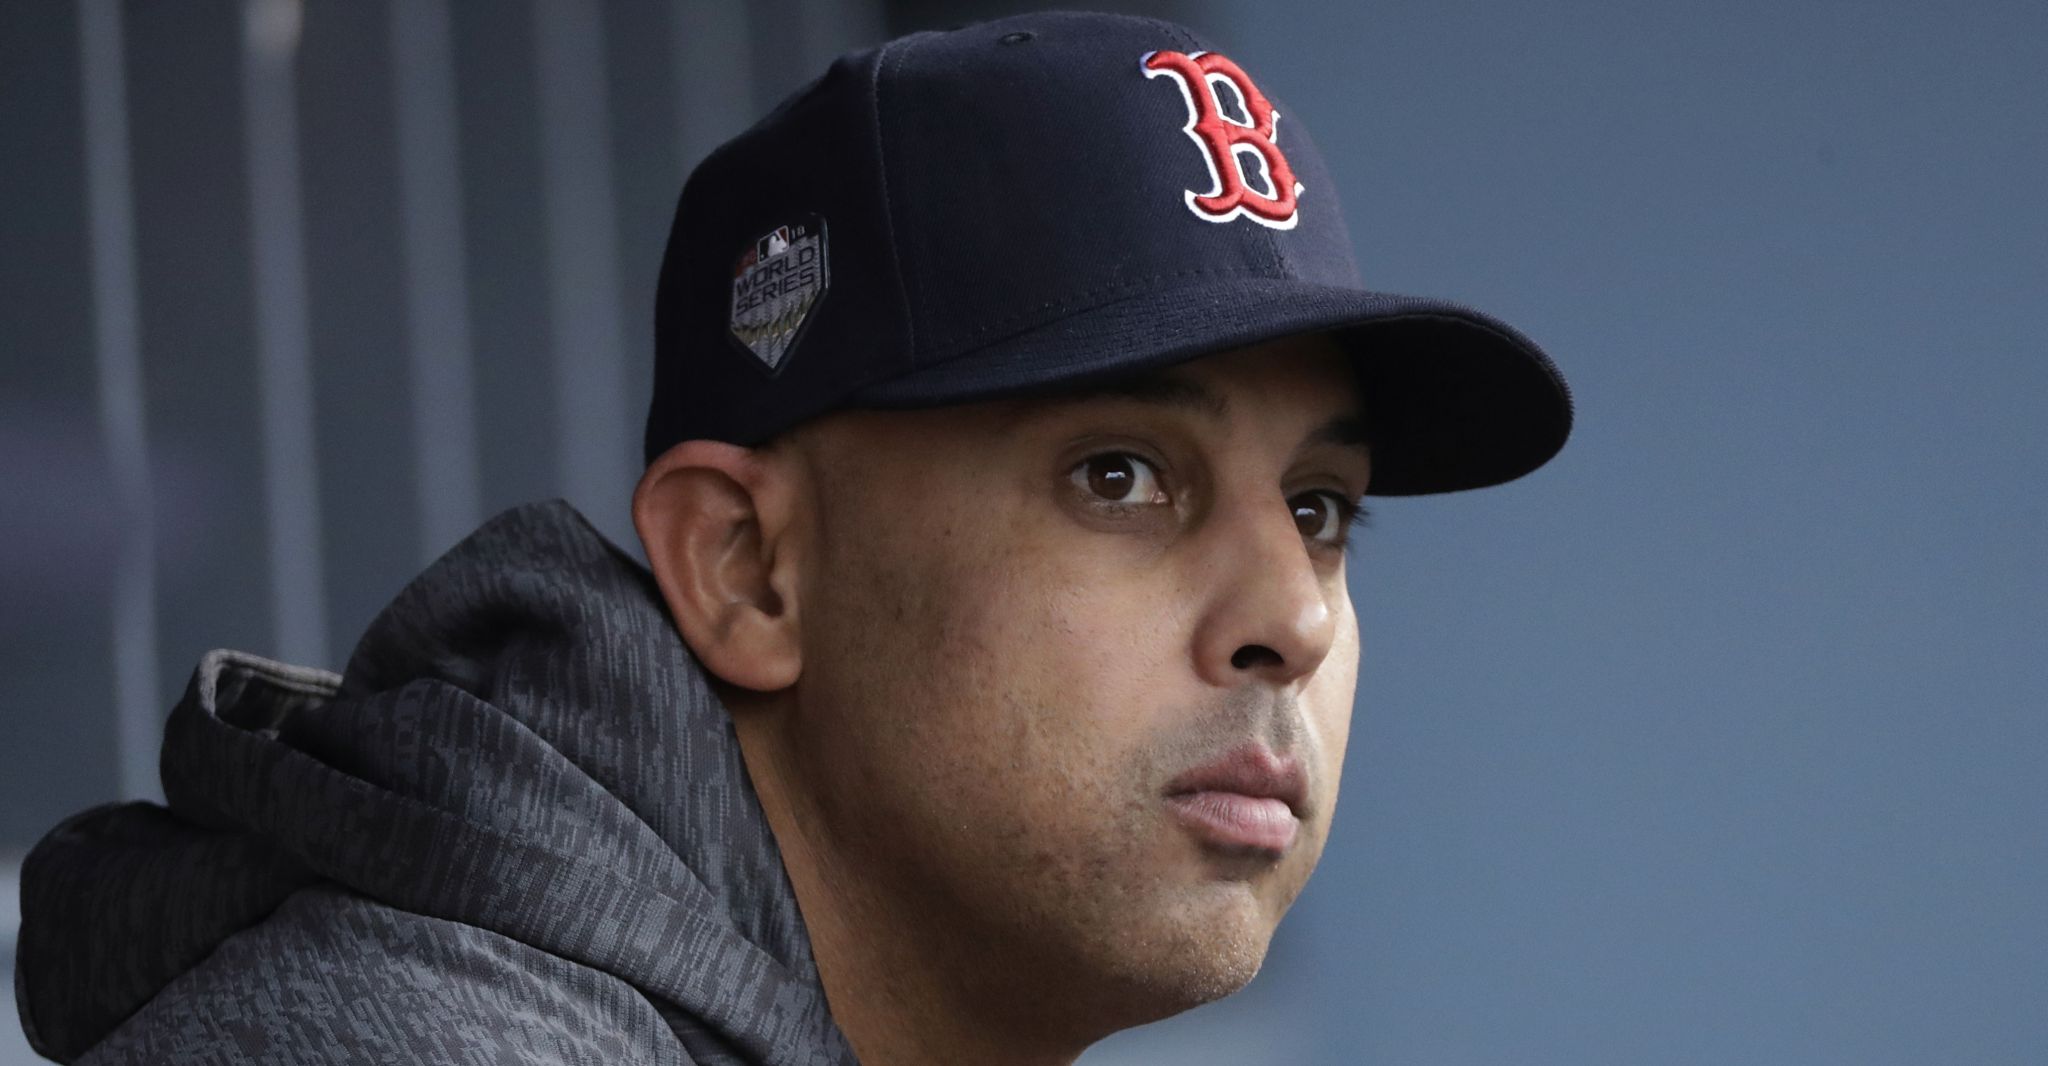 Red Sox part ways with Alex Cora, who was integral in Astros sign